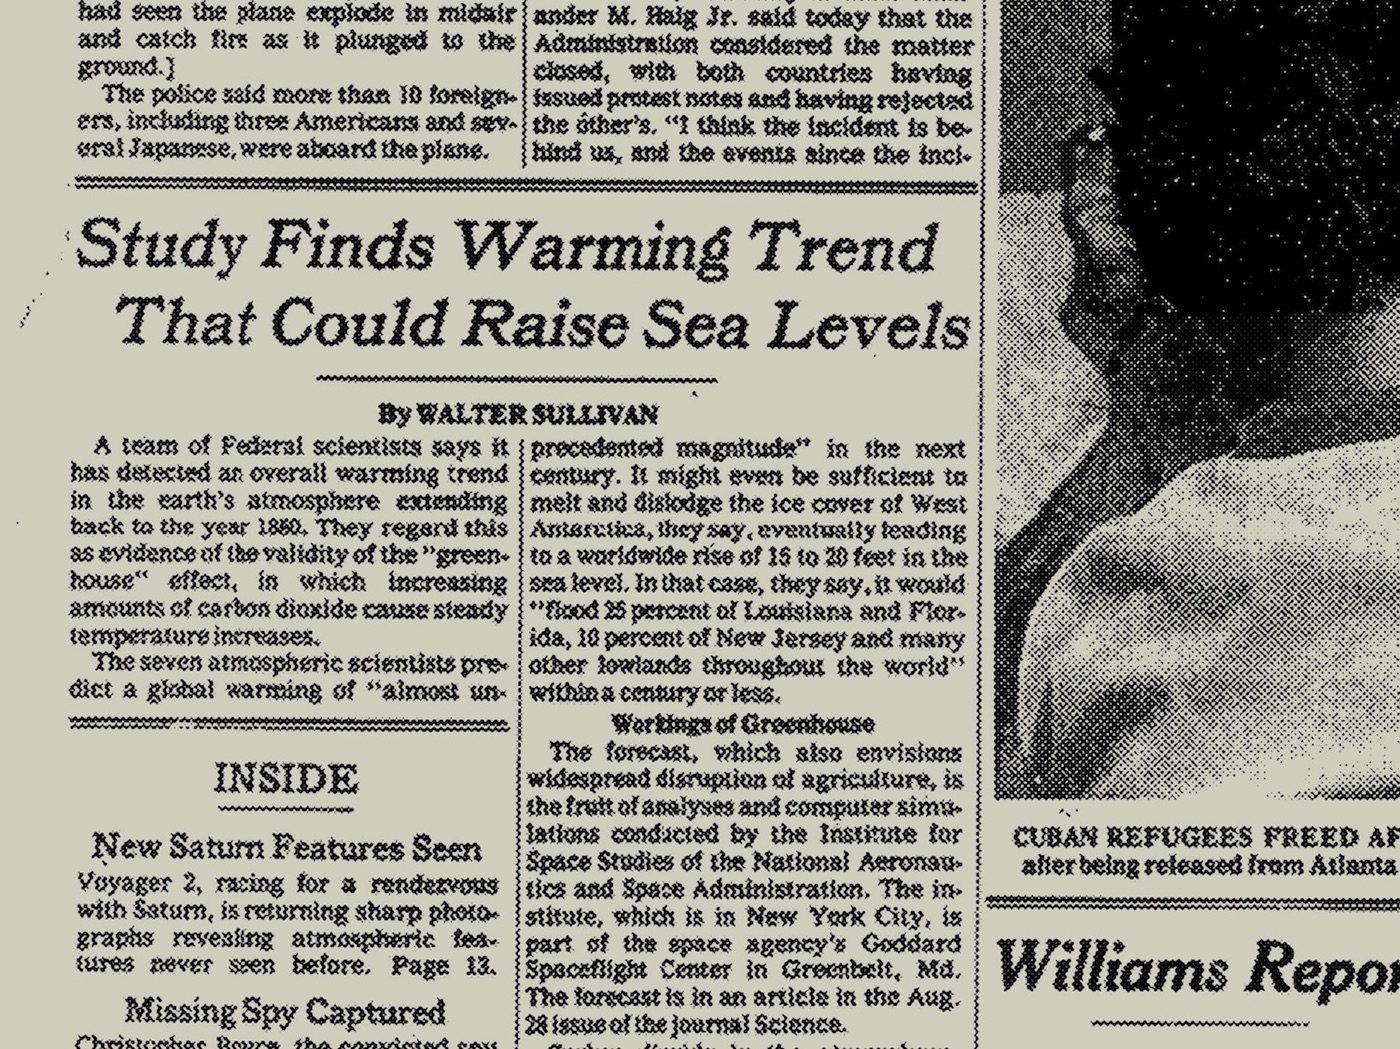 40 Years Ago, Scientists Predicted Climate Change. And Hey, They Were